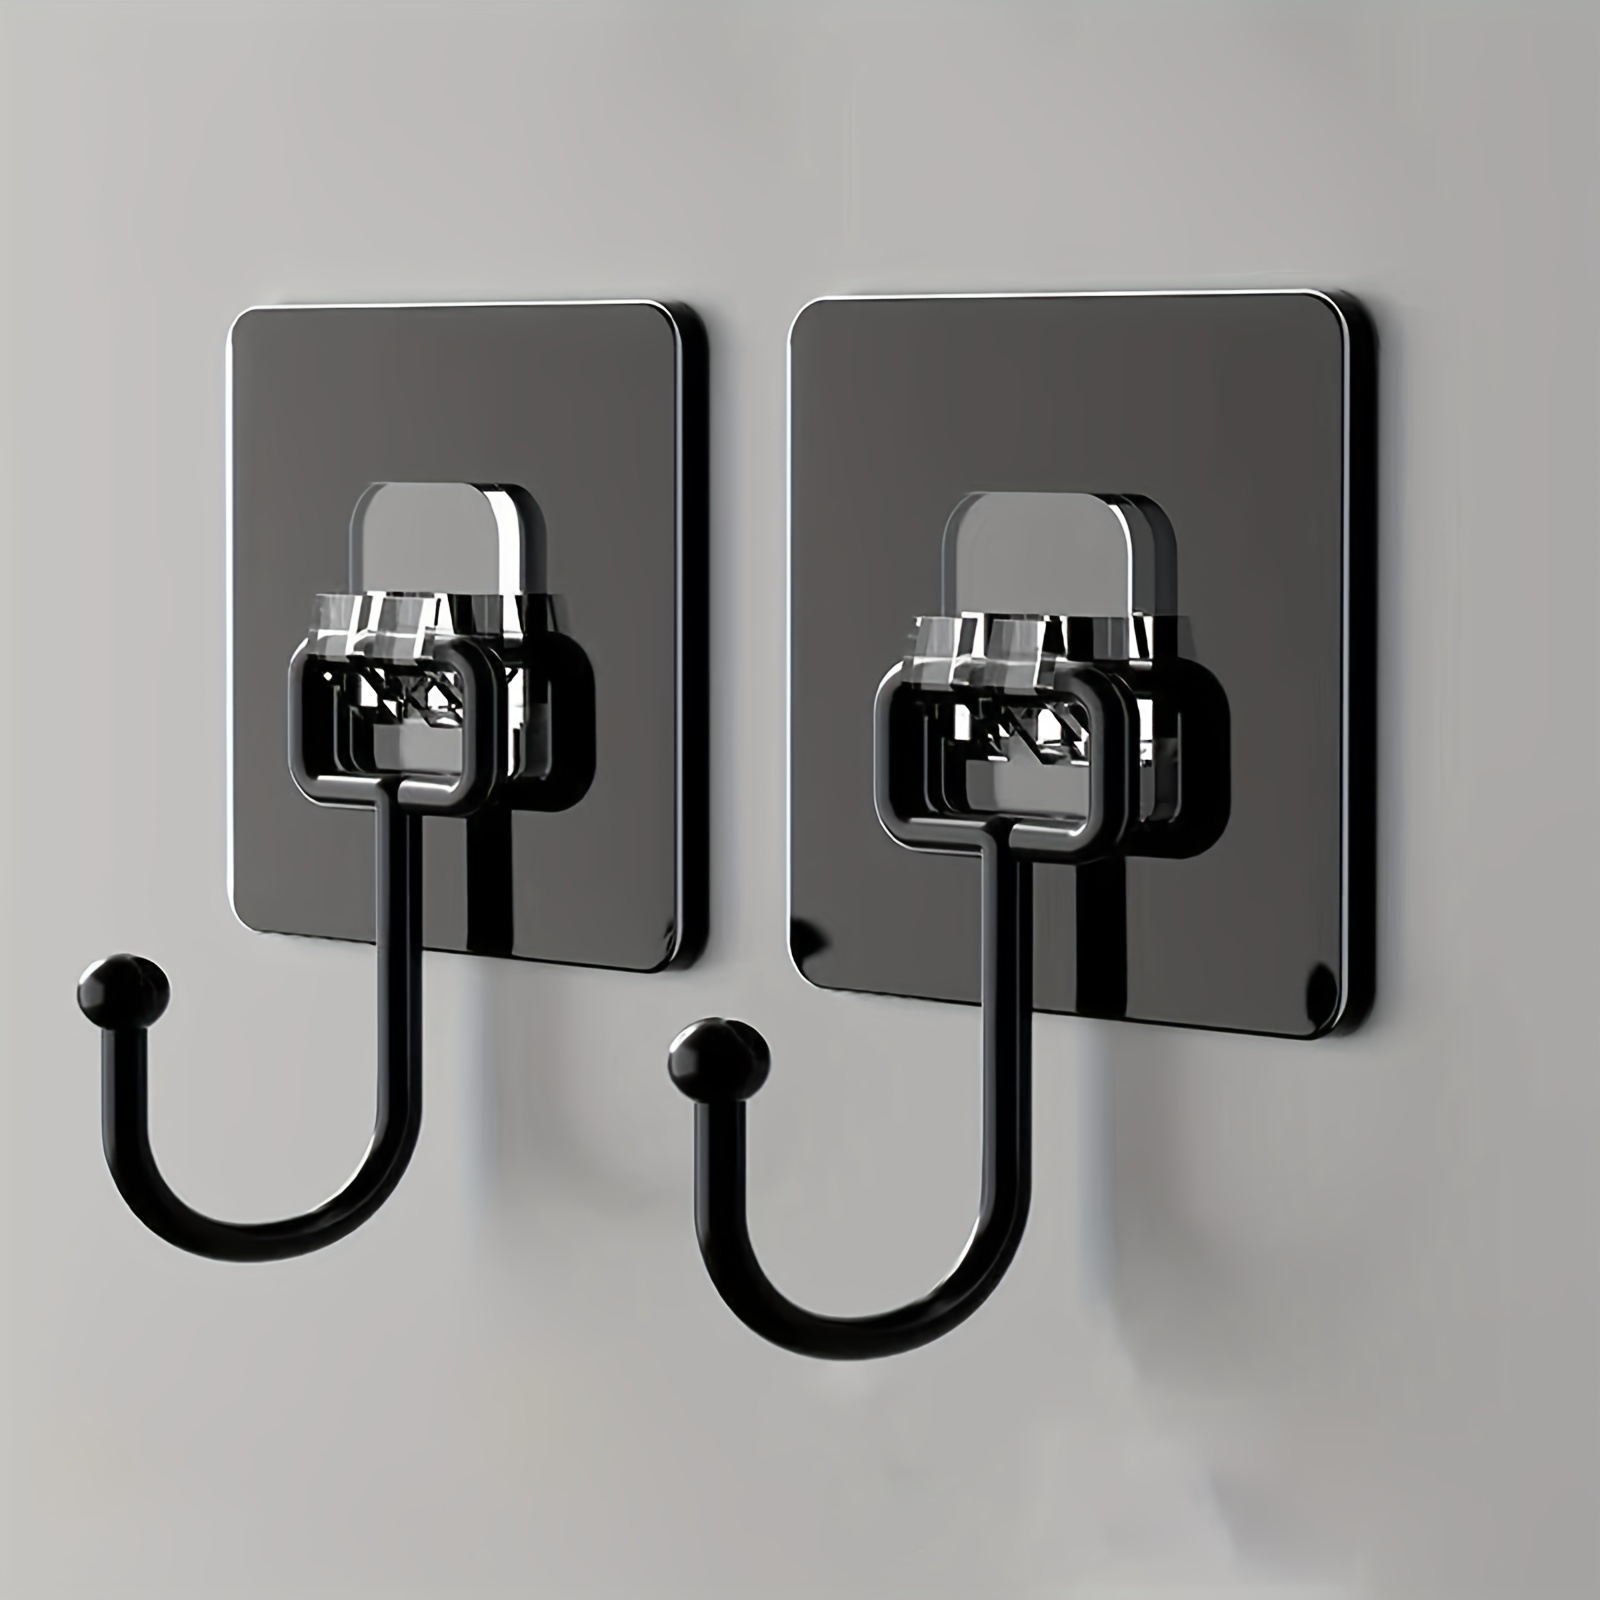 3M Hooks Self-Adhesive Hook Black Stainless Steel Wall Hangers Without  Drilling Waterproof Rustproof for Kitchen, Bathrooms, Doors, Office, Closet  Hanging Bathrobes Towels Clothes Keys and Hats : : Tools & Home  Improvement